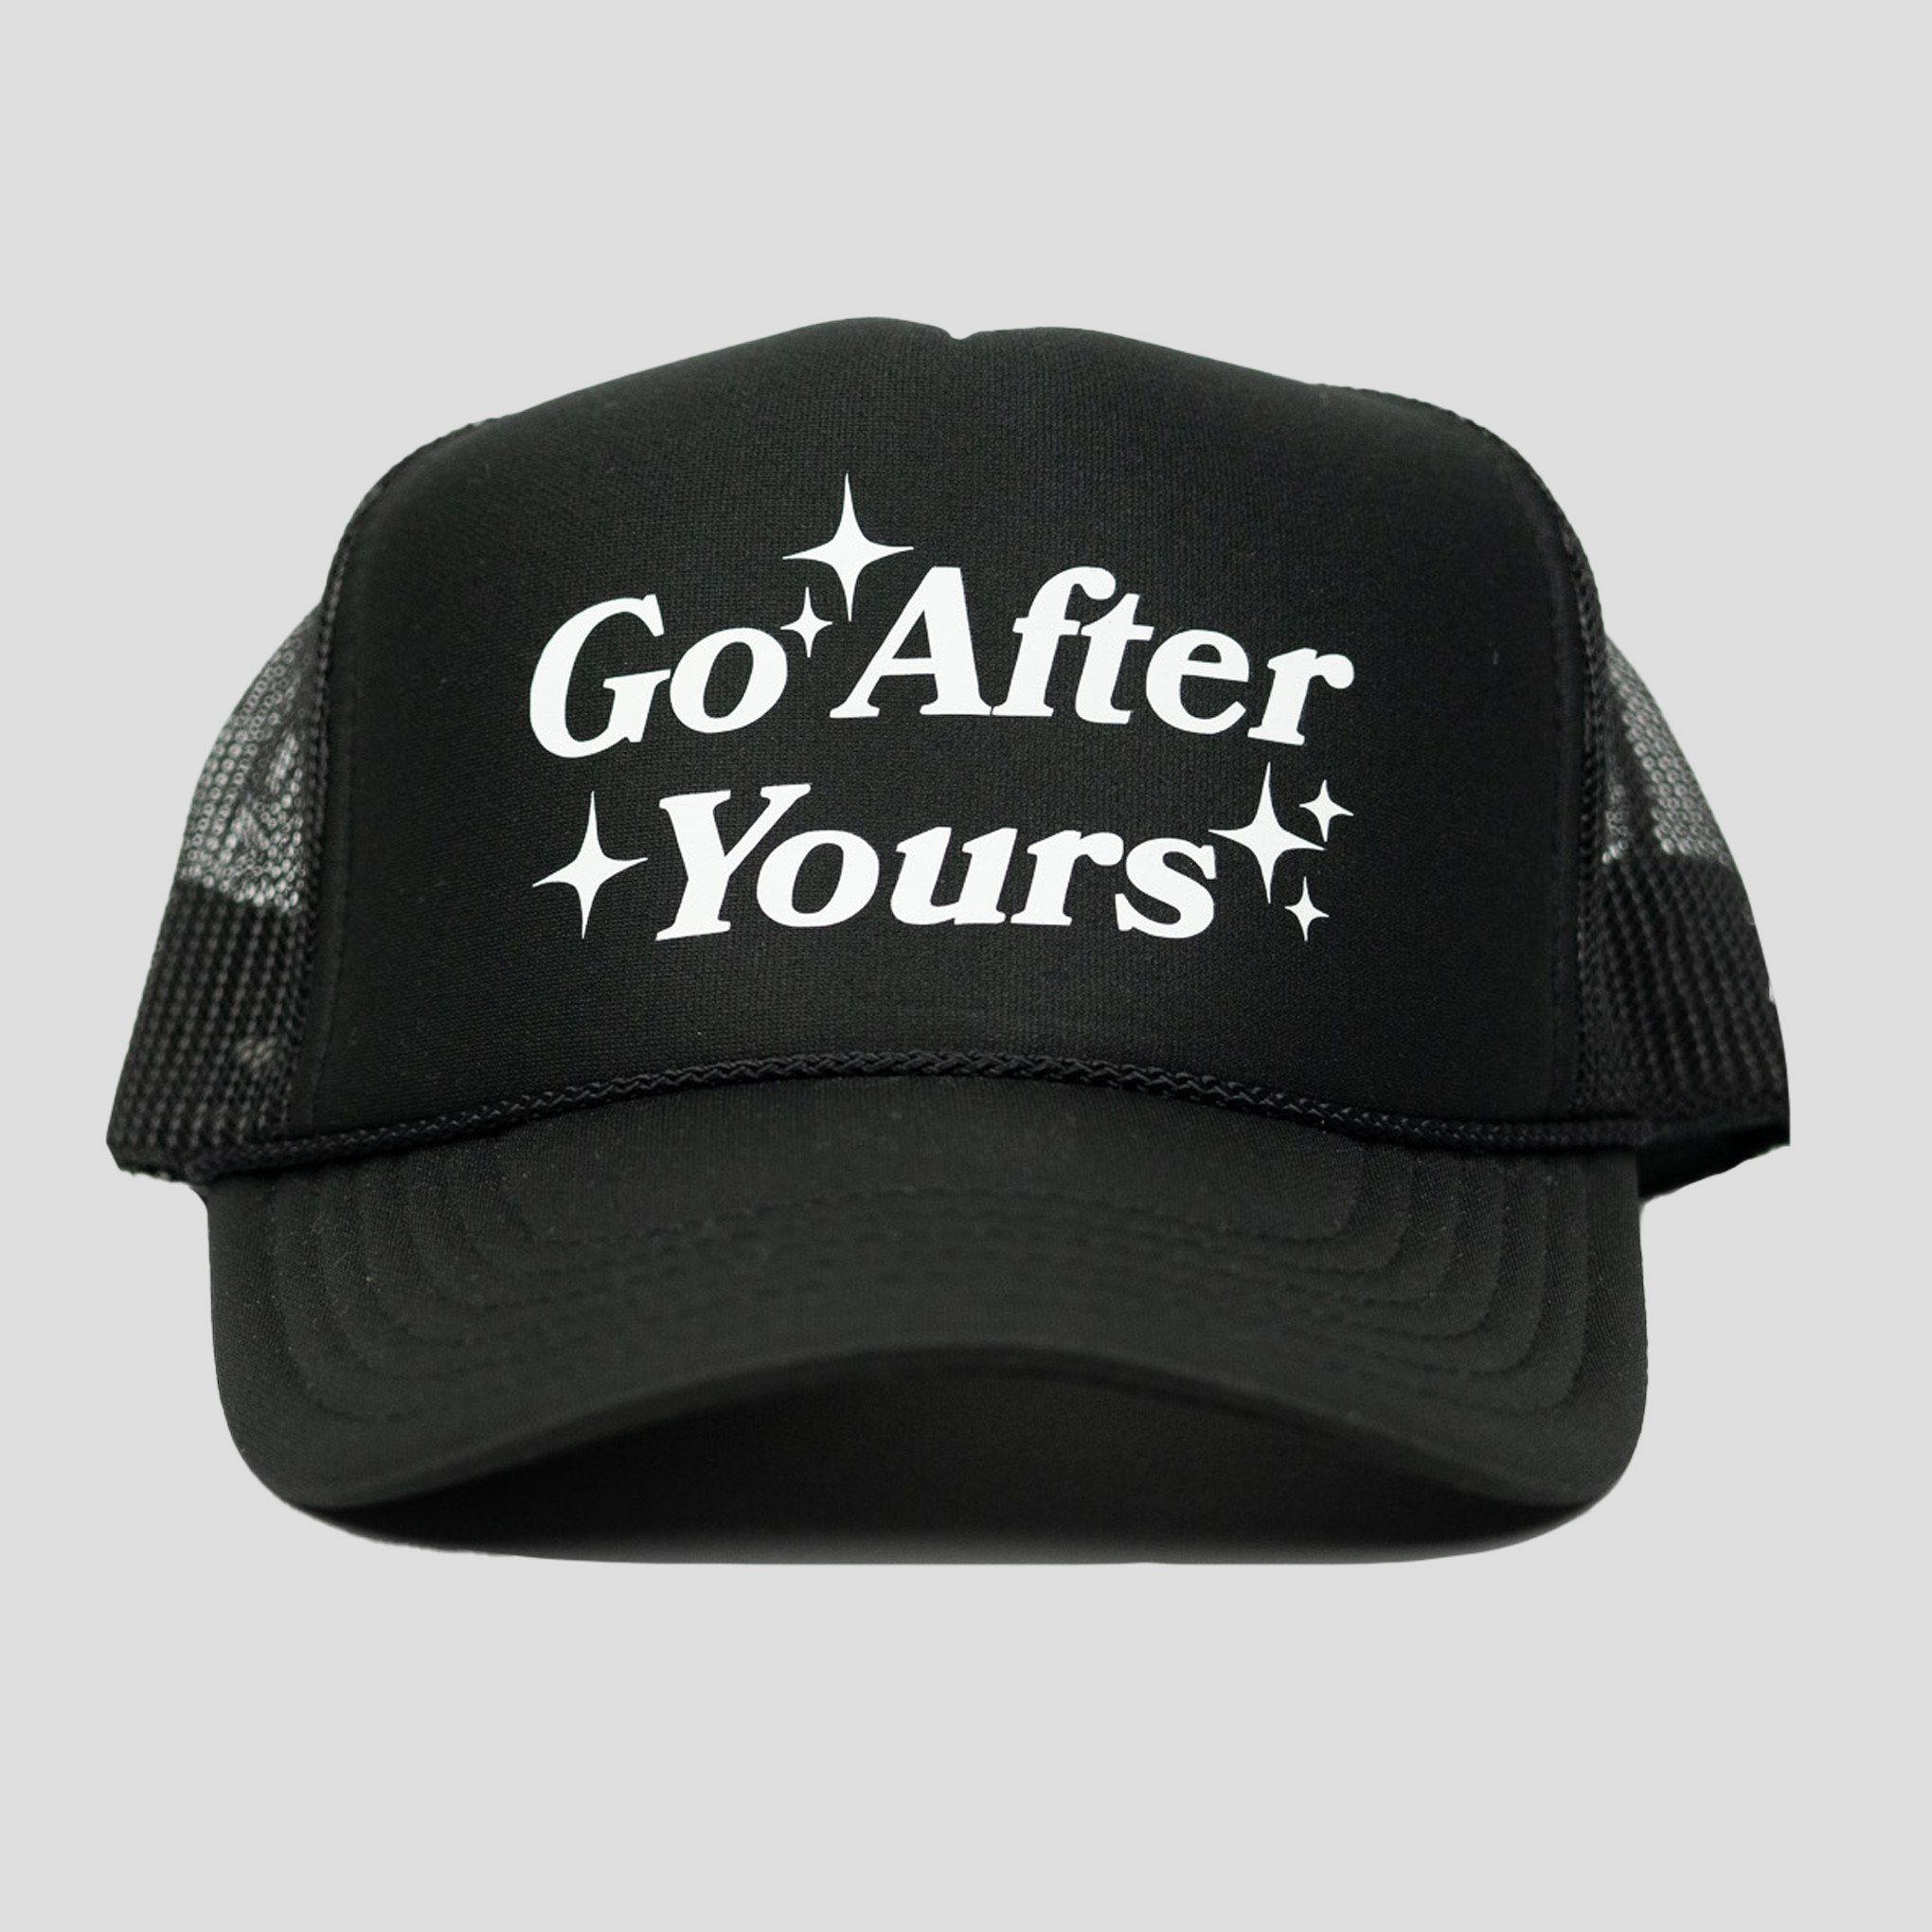 Go After Yours Trucker Hat (BLACK)